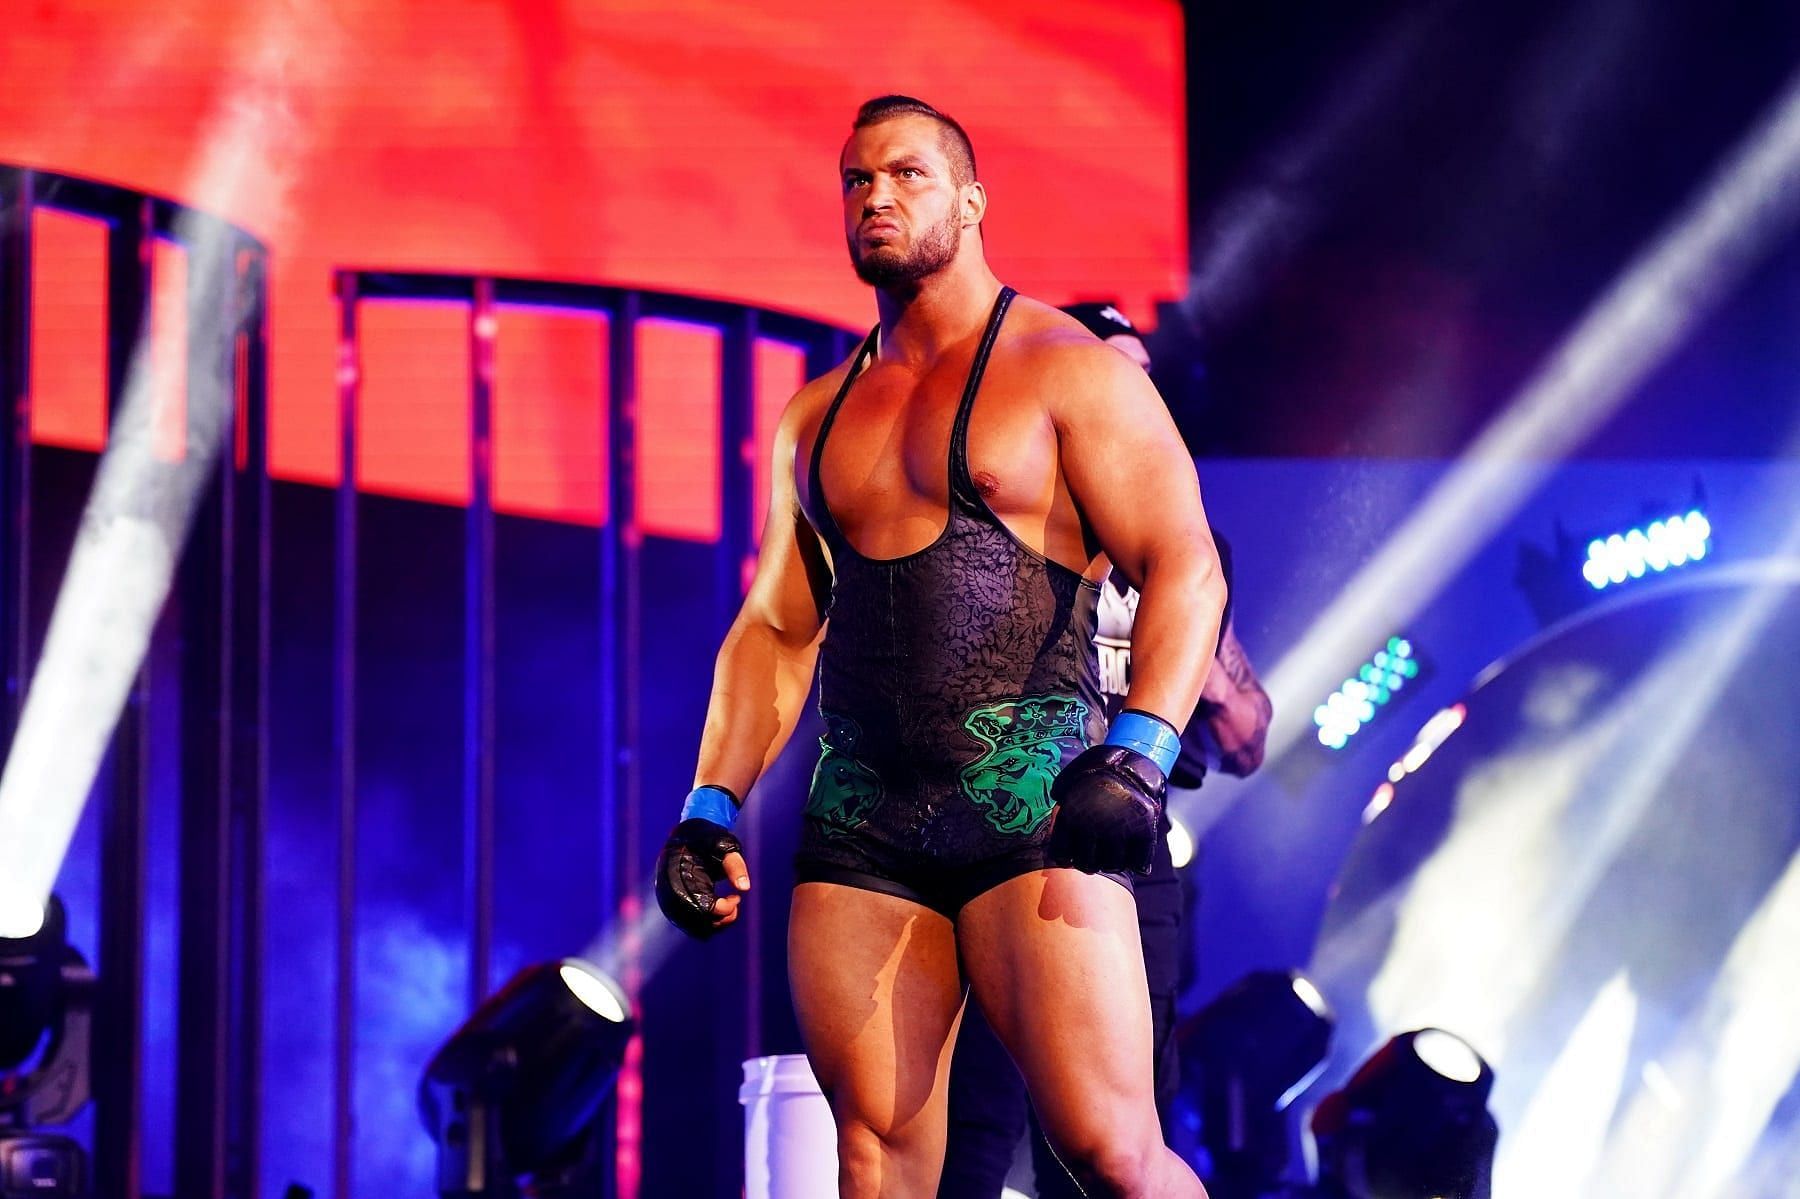 Wardlow is the former bodyguard of MJF in AEW.